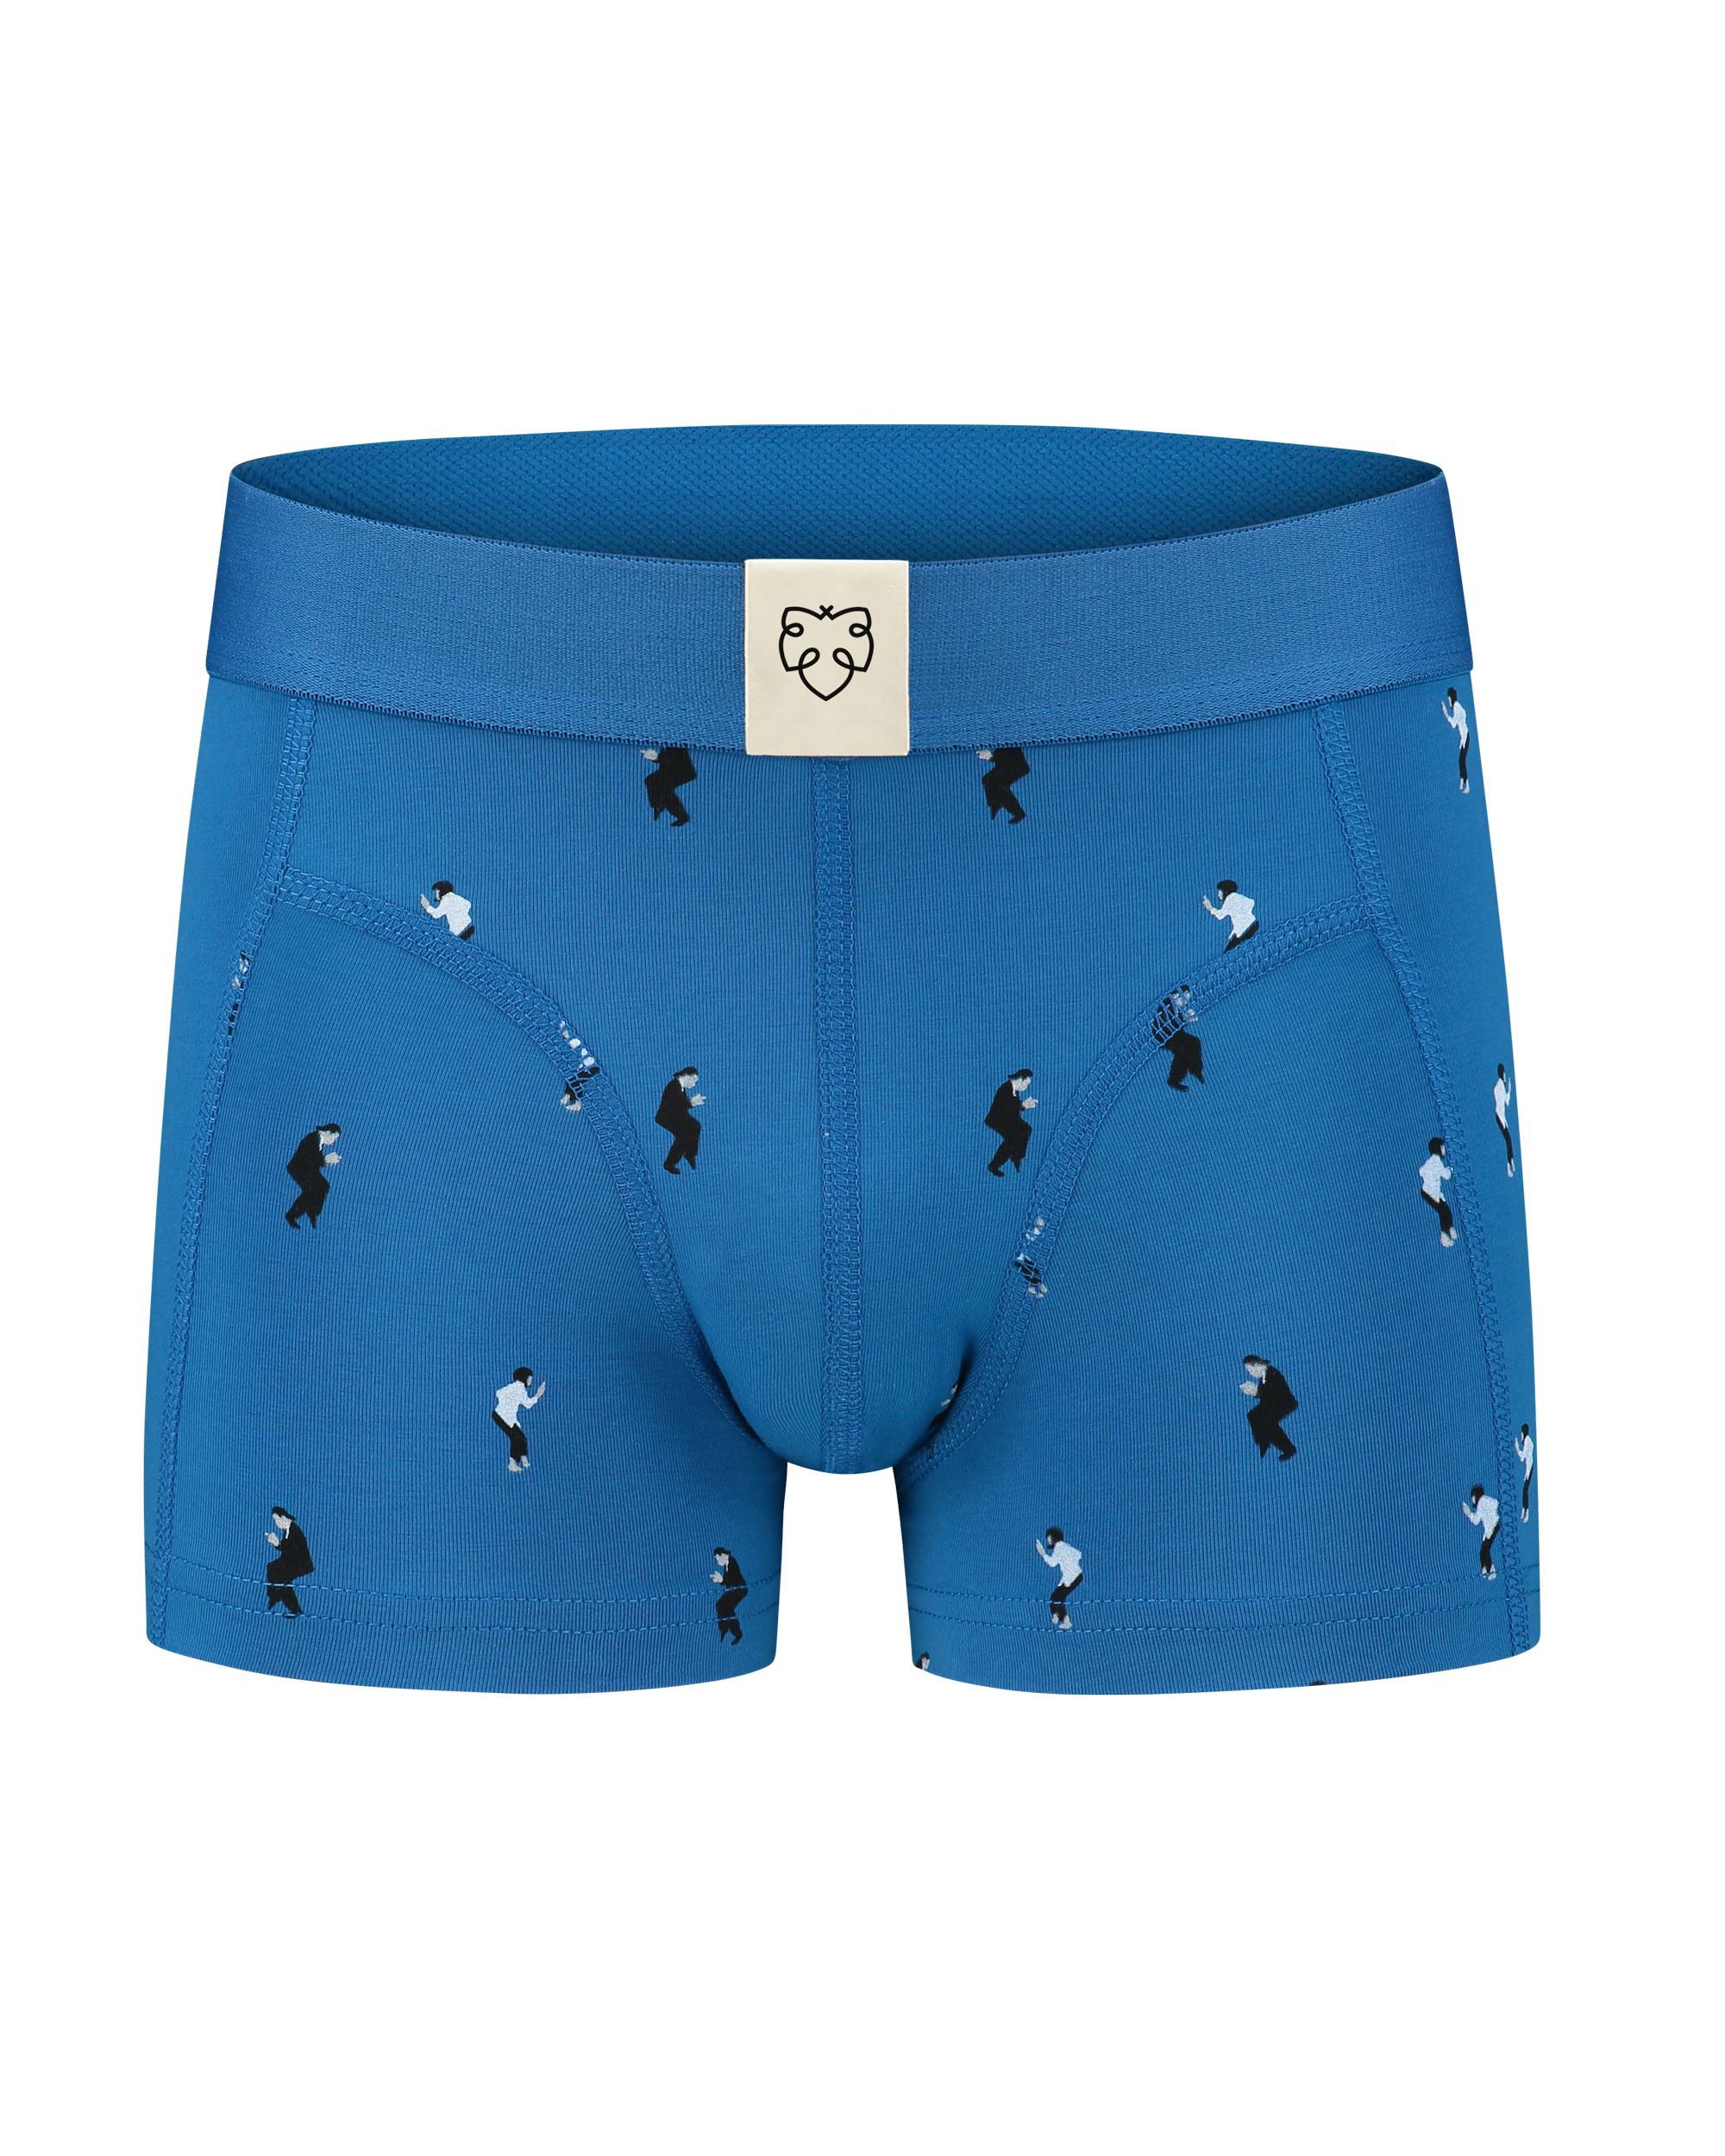 A-dam Boys Boxer briefs with dancing couple from GOTS organic